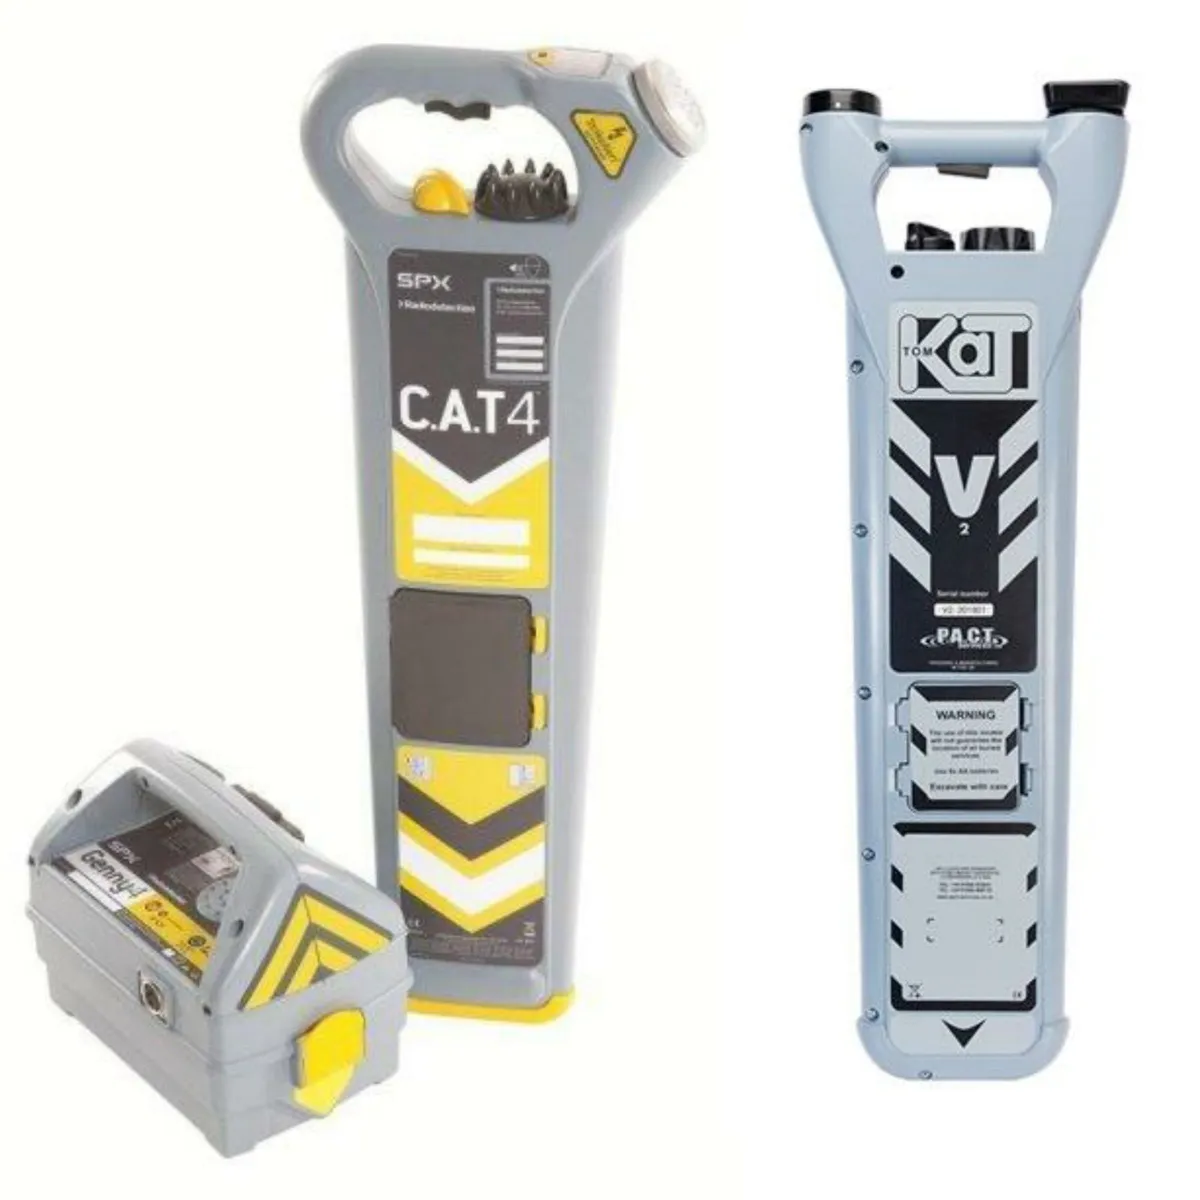 Cat4 TOMKAT PIPE & CABLE LOCATOR GENNY